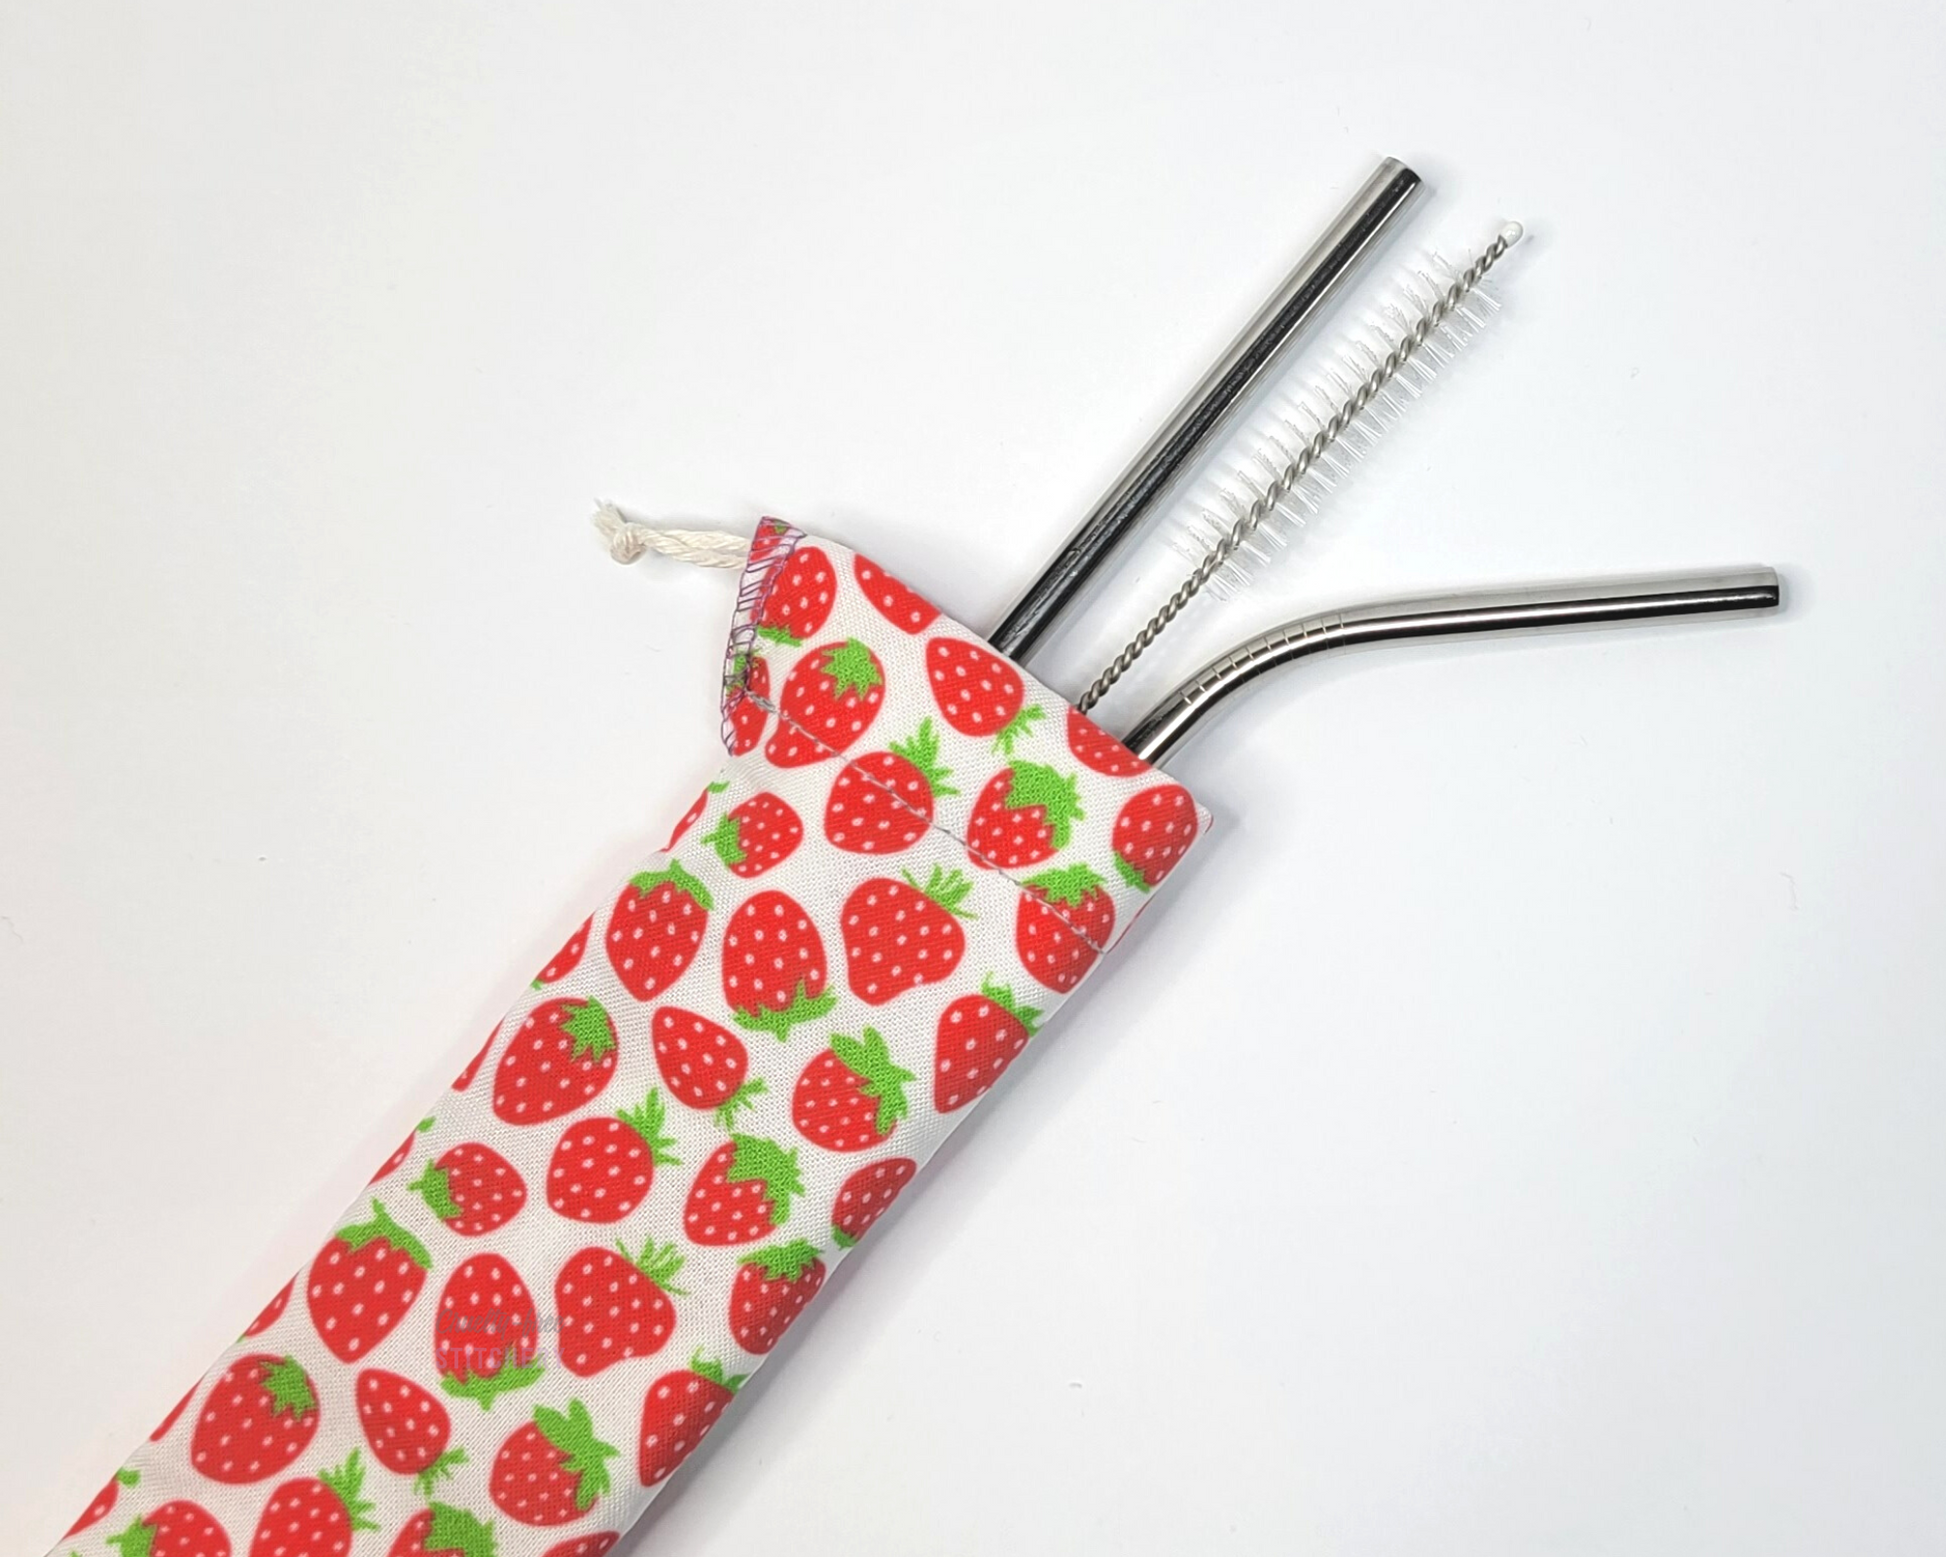 Reusable straw pouch with stainless steel straws sticking out the top. The fabric of the pouch is white with tiny red strawberries and it has a drawstring closure.